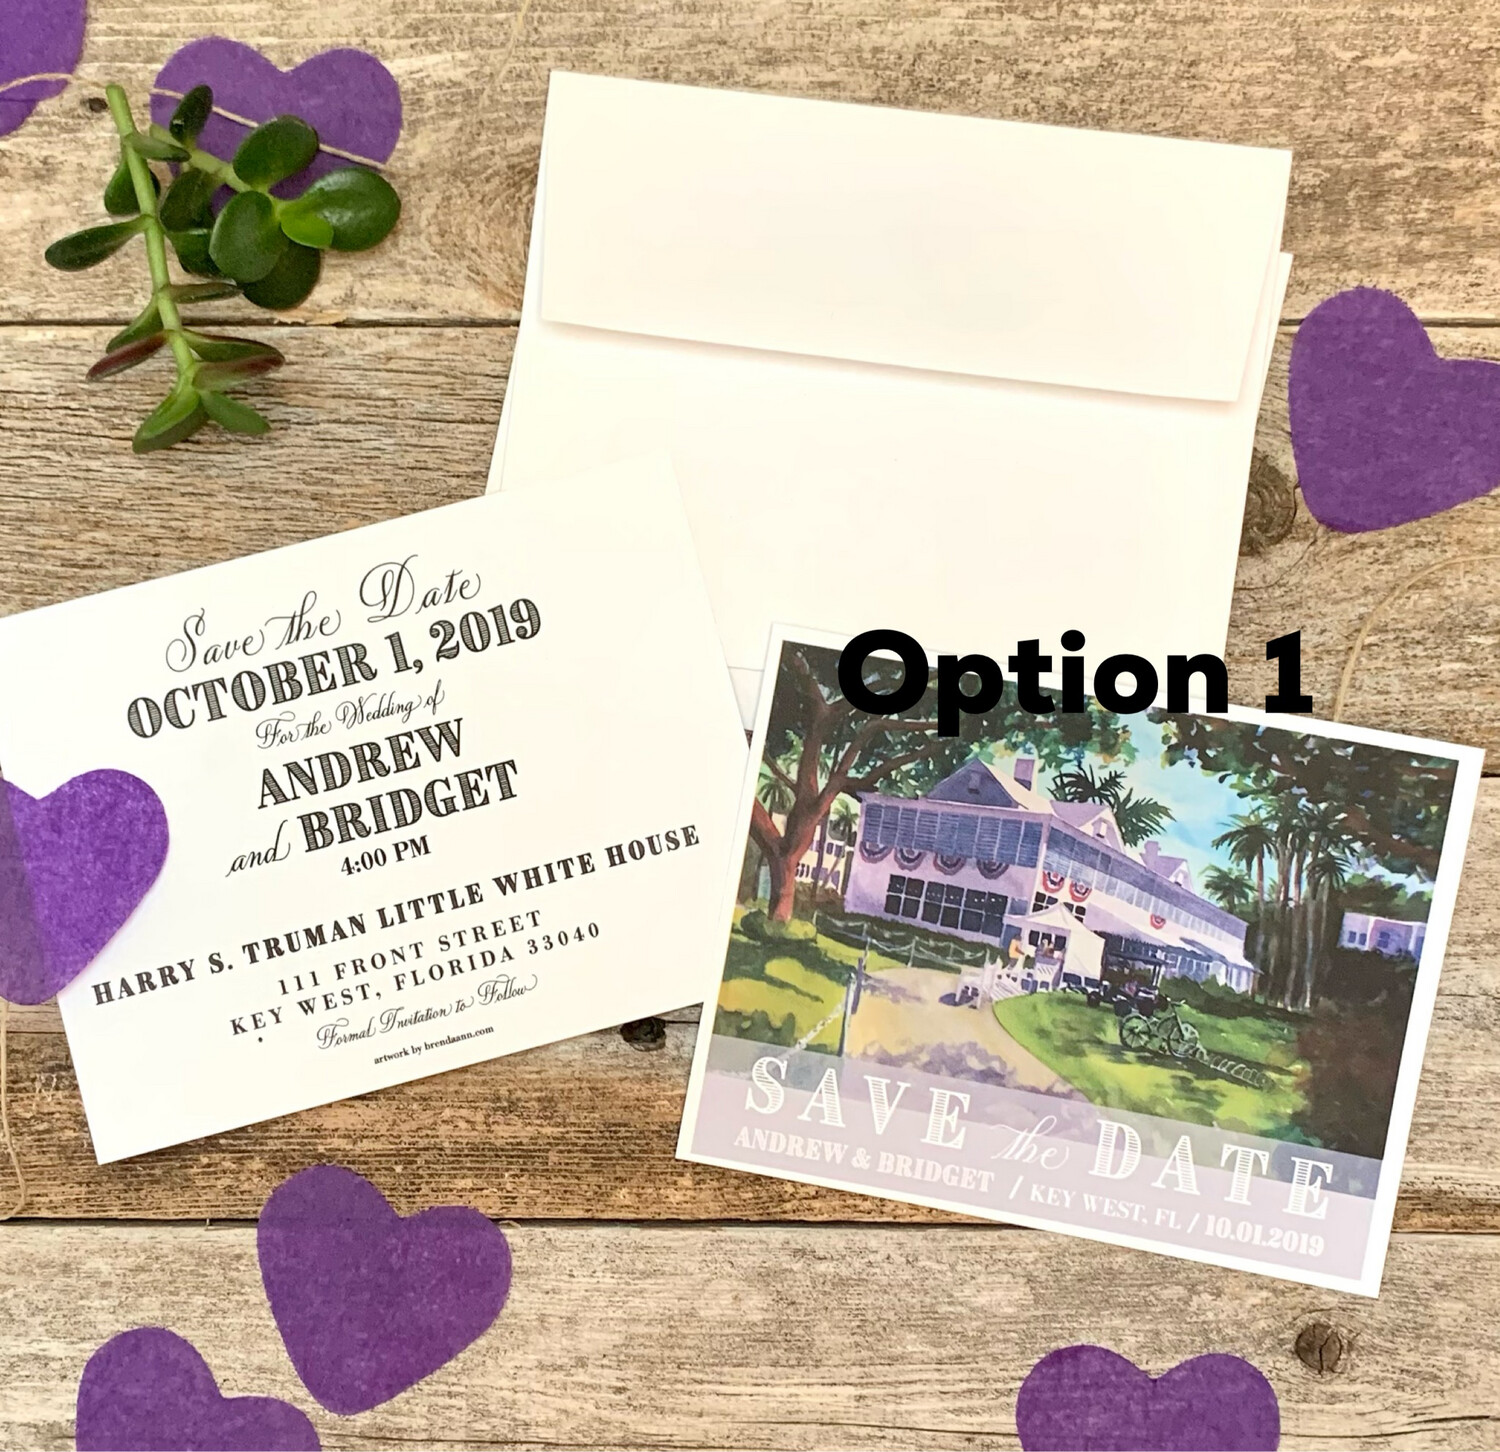 Truman Little White House Key West Watercolor Wedding Save the Date Cards